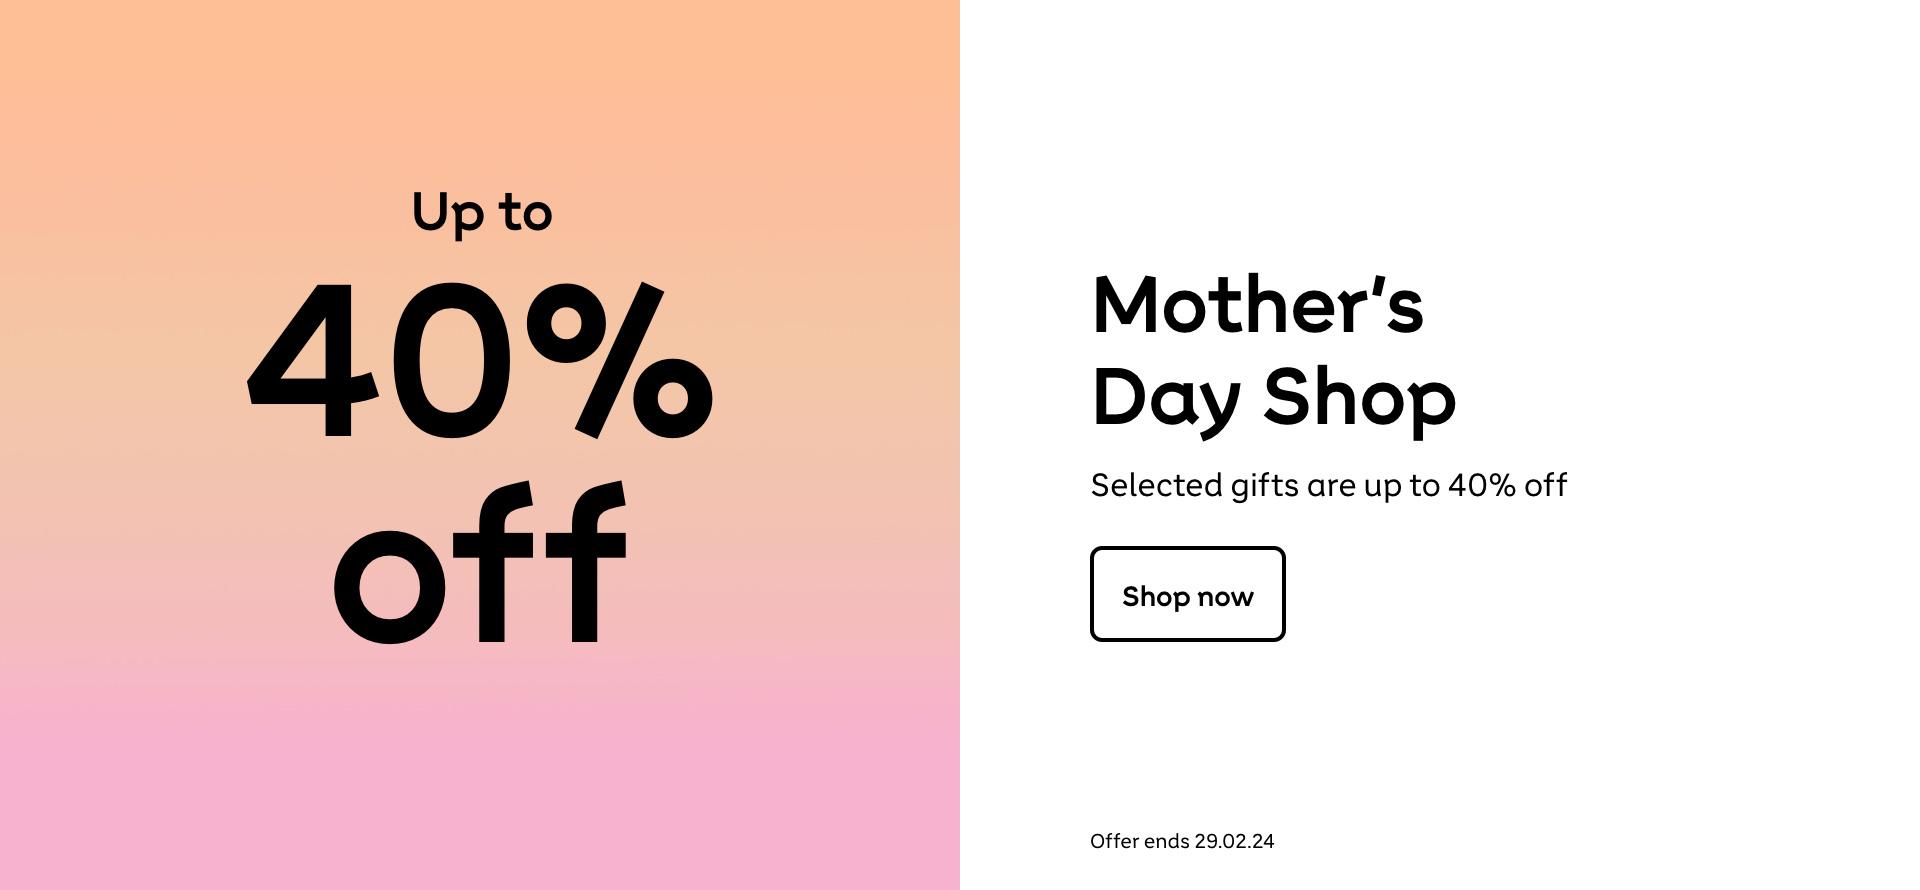 Up to 40% off Mothers Day. Offer ends 29.02.24